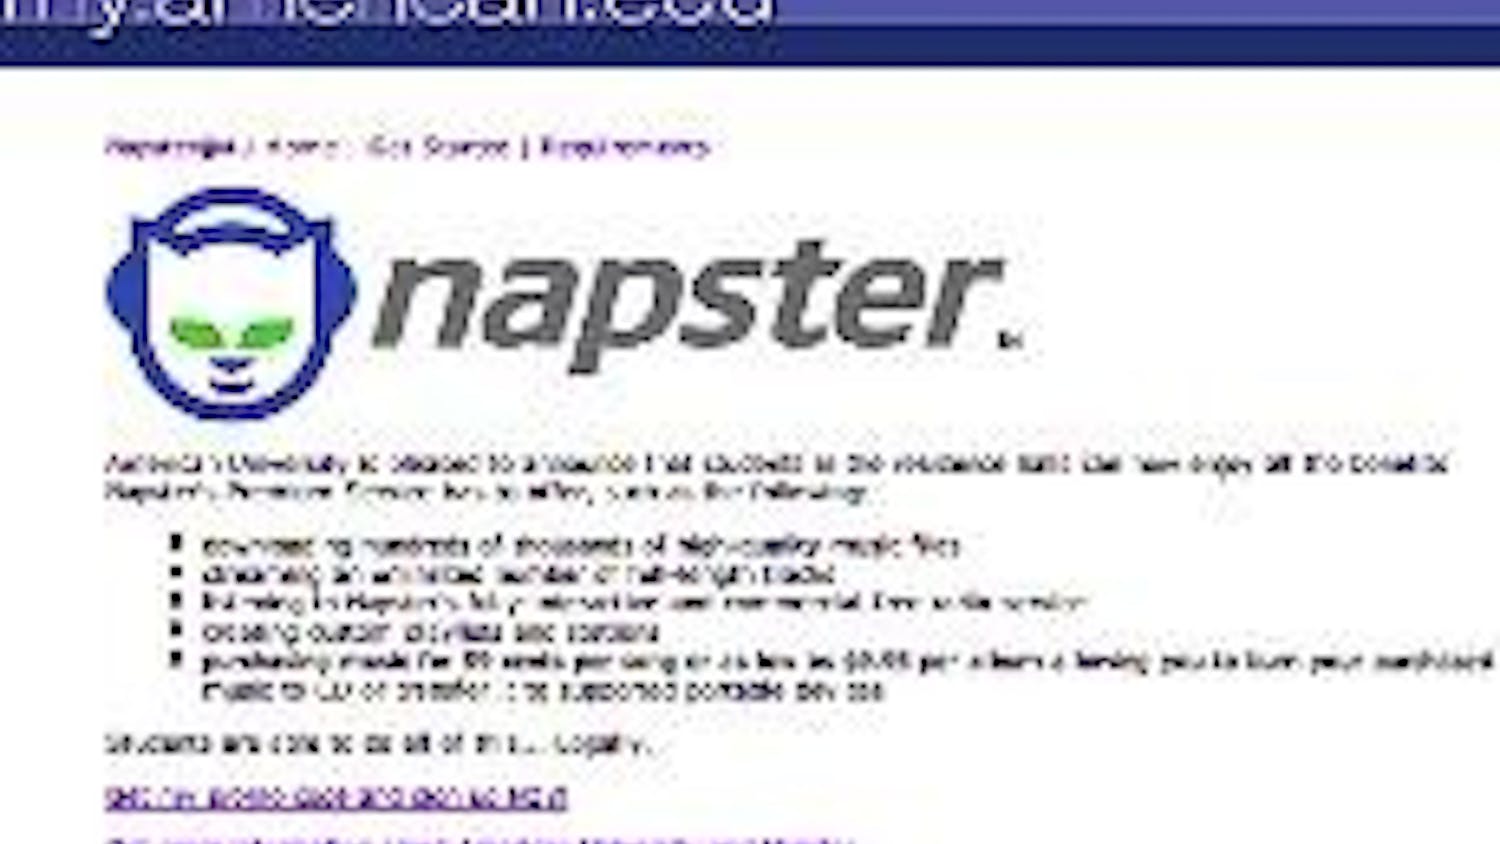 Since switching to Napster,  AU has had only 90 complaints. 